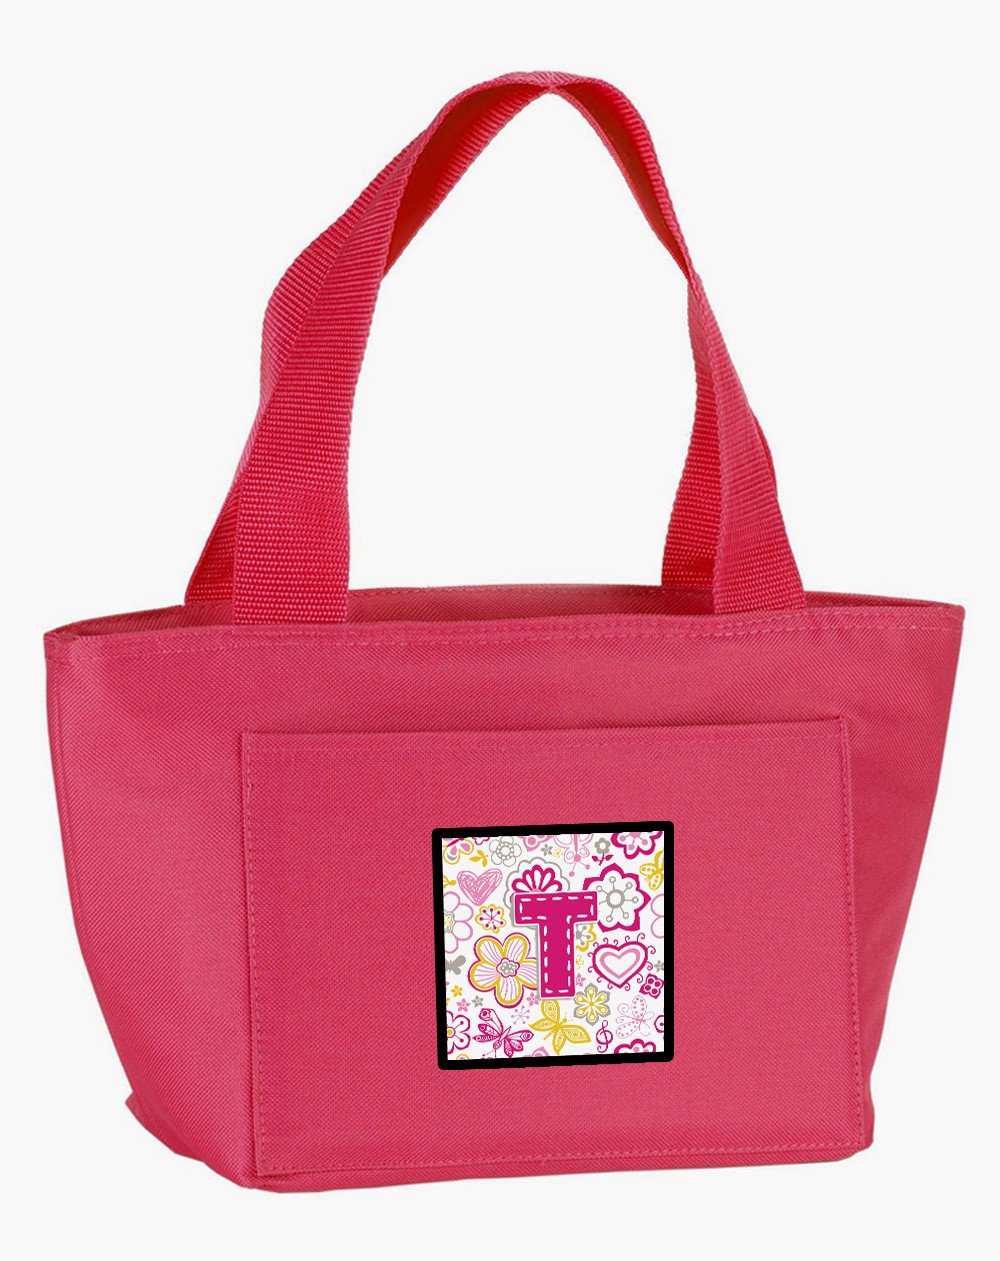 Letter T Flowers and Butterflies Pink Lunch Bag CJ2005-TPK-8808 by Caroline's Treasures